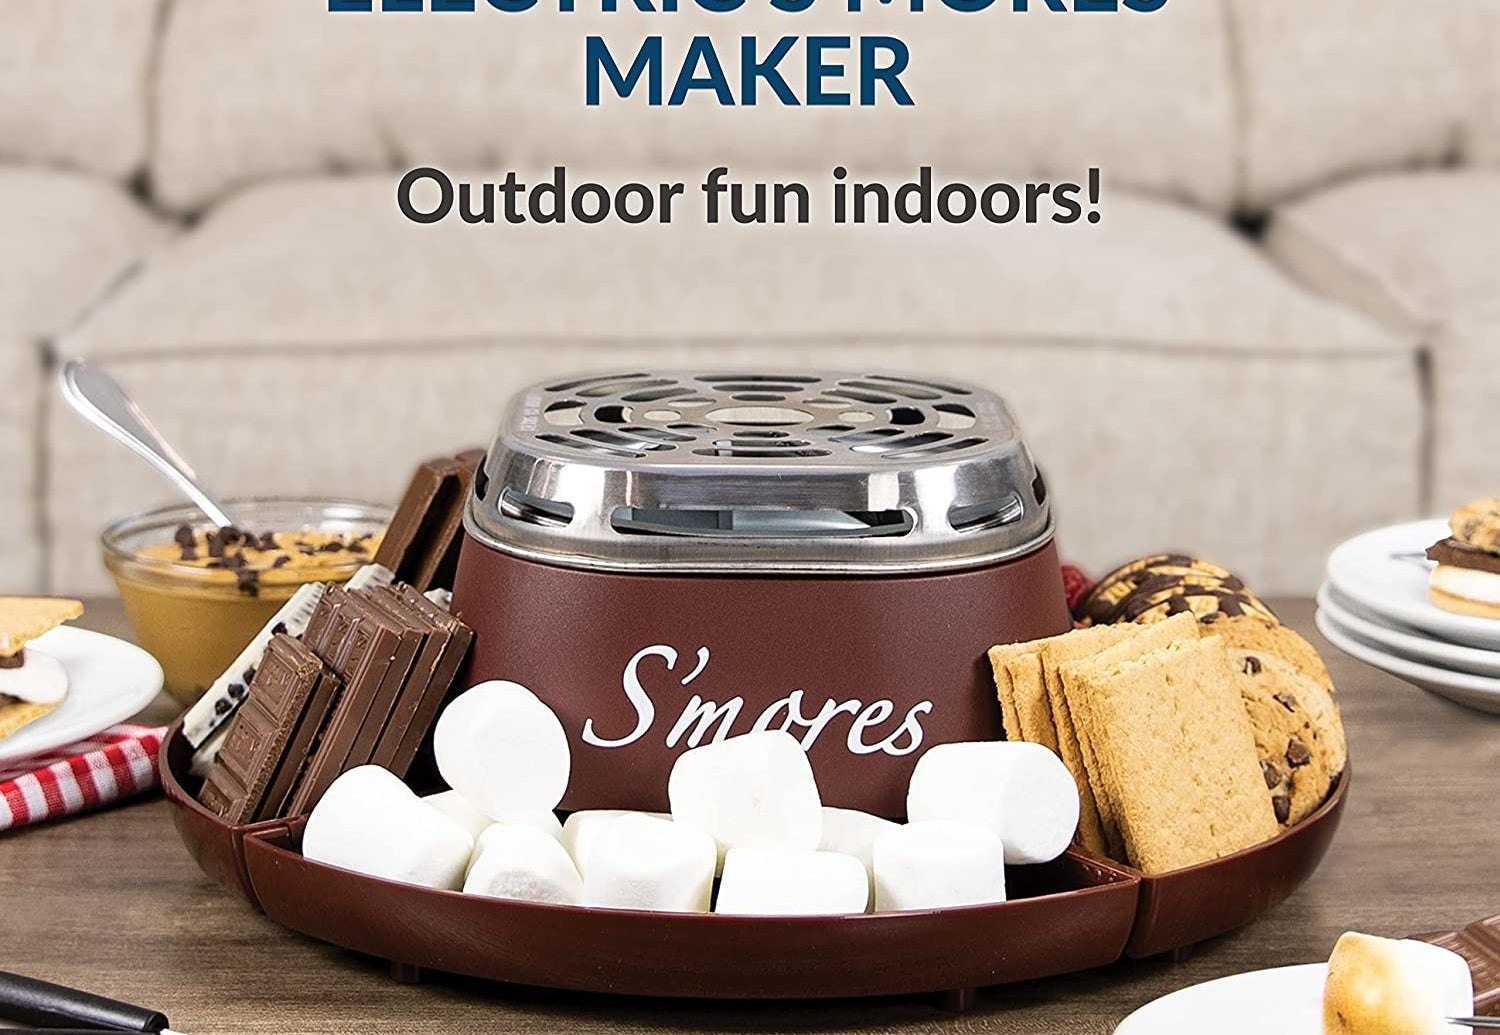 a tabletop smores kit with marshmallows, chocolate, and cookies arranged around the outside